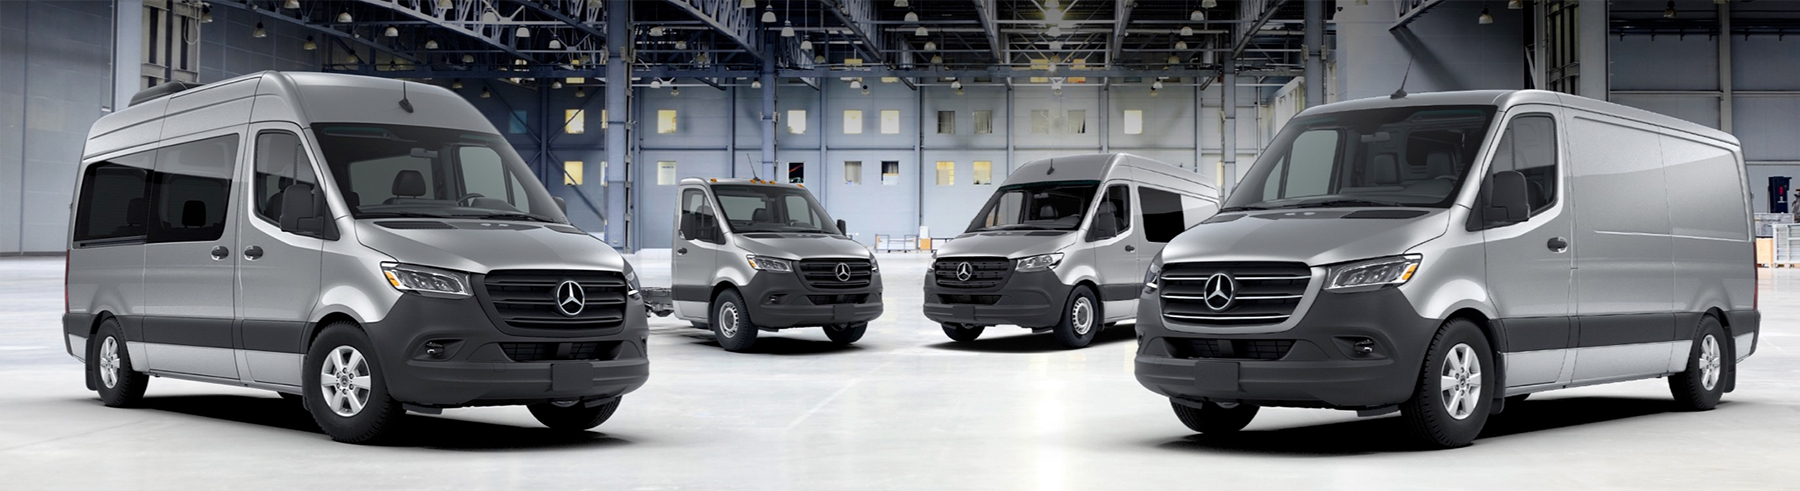 2024 Mercedes-Benz Sprinter vans in a large, empty warehouse setting.